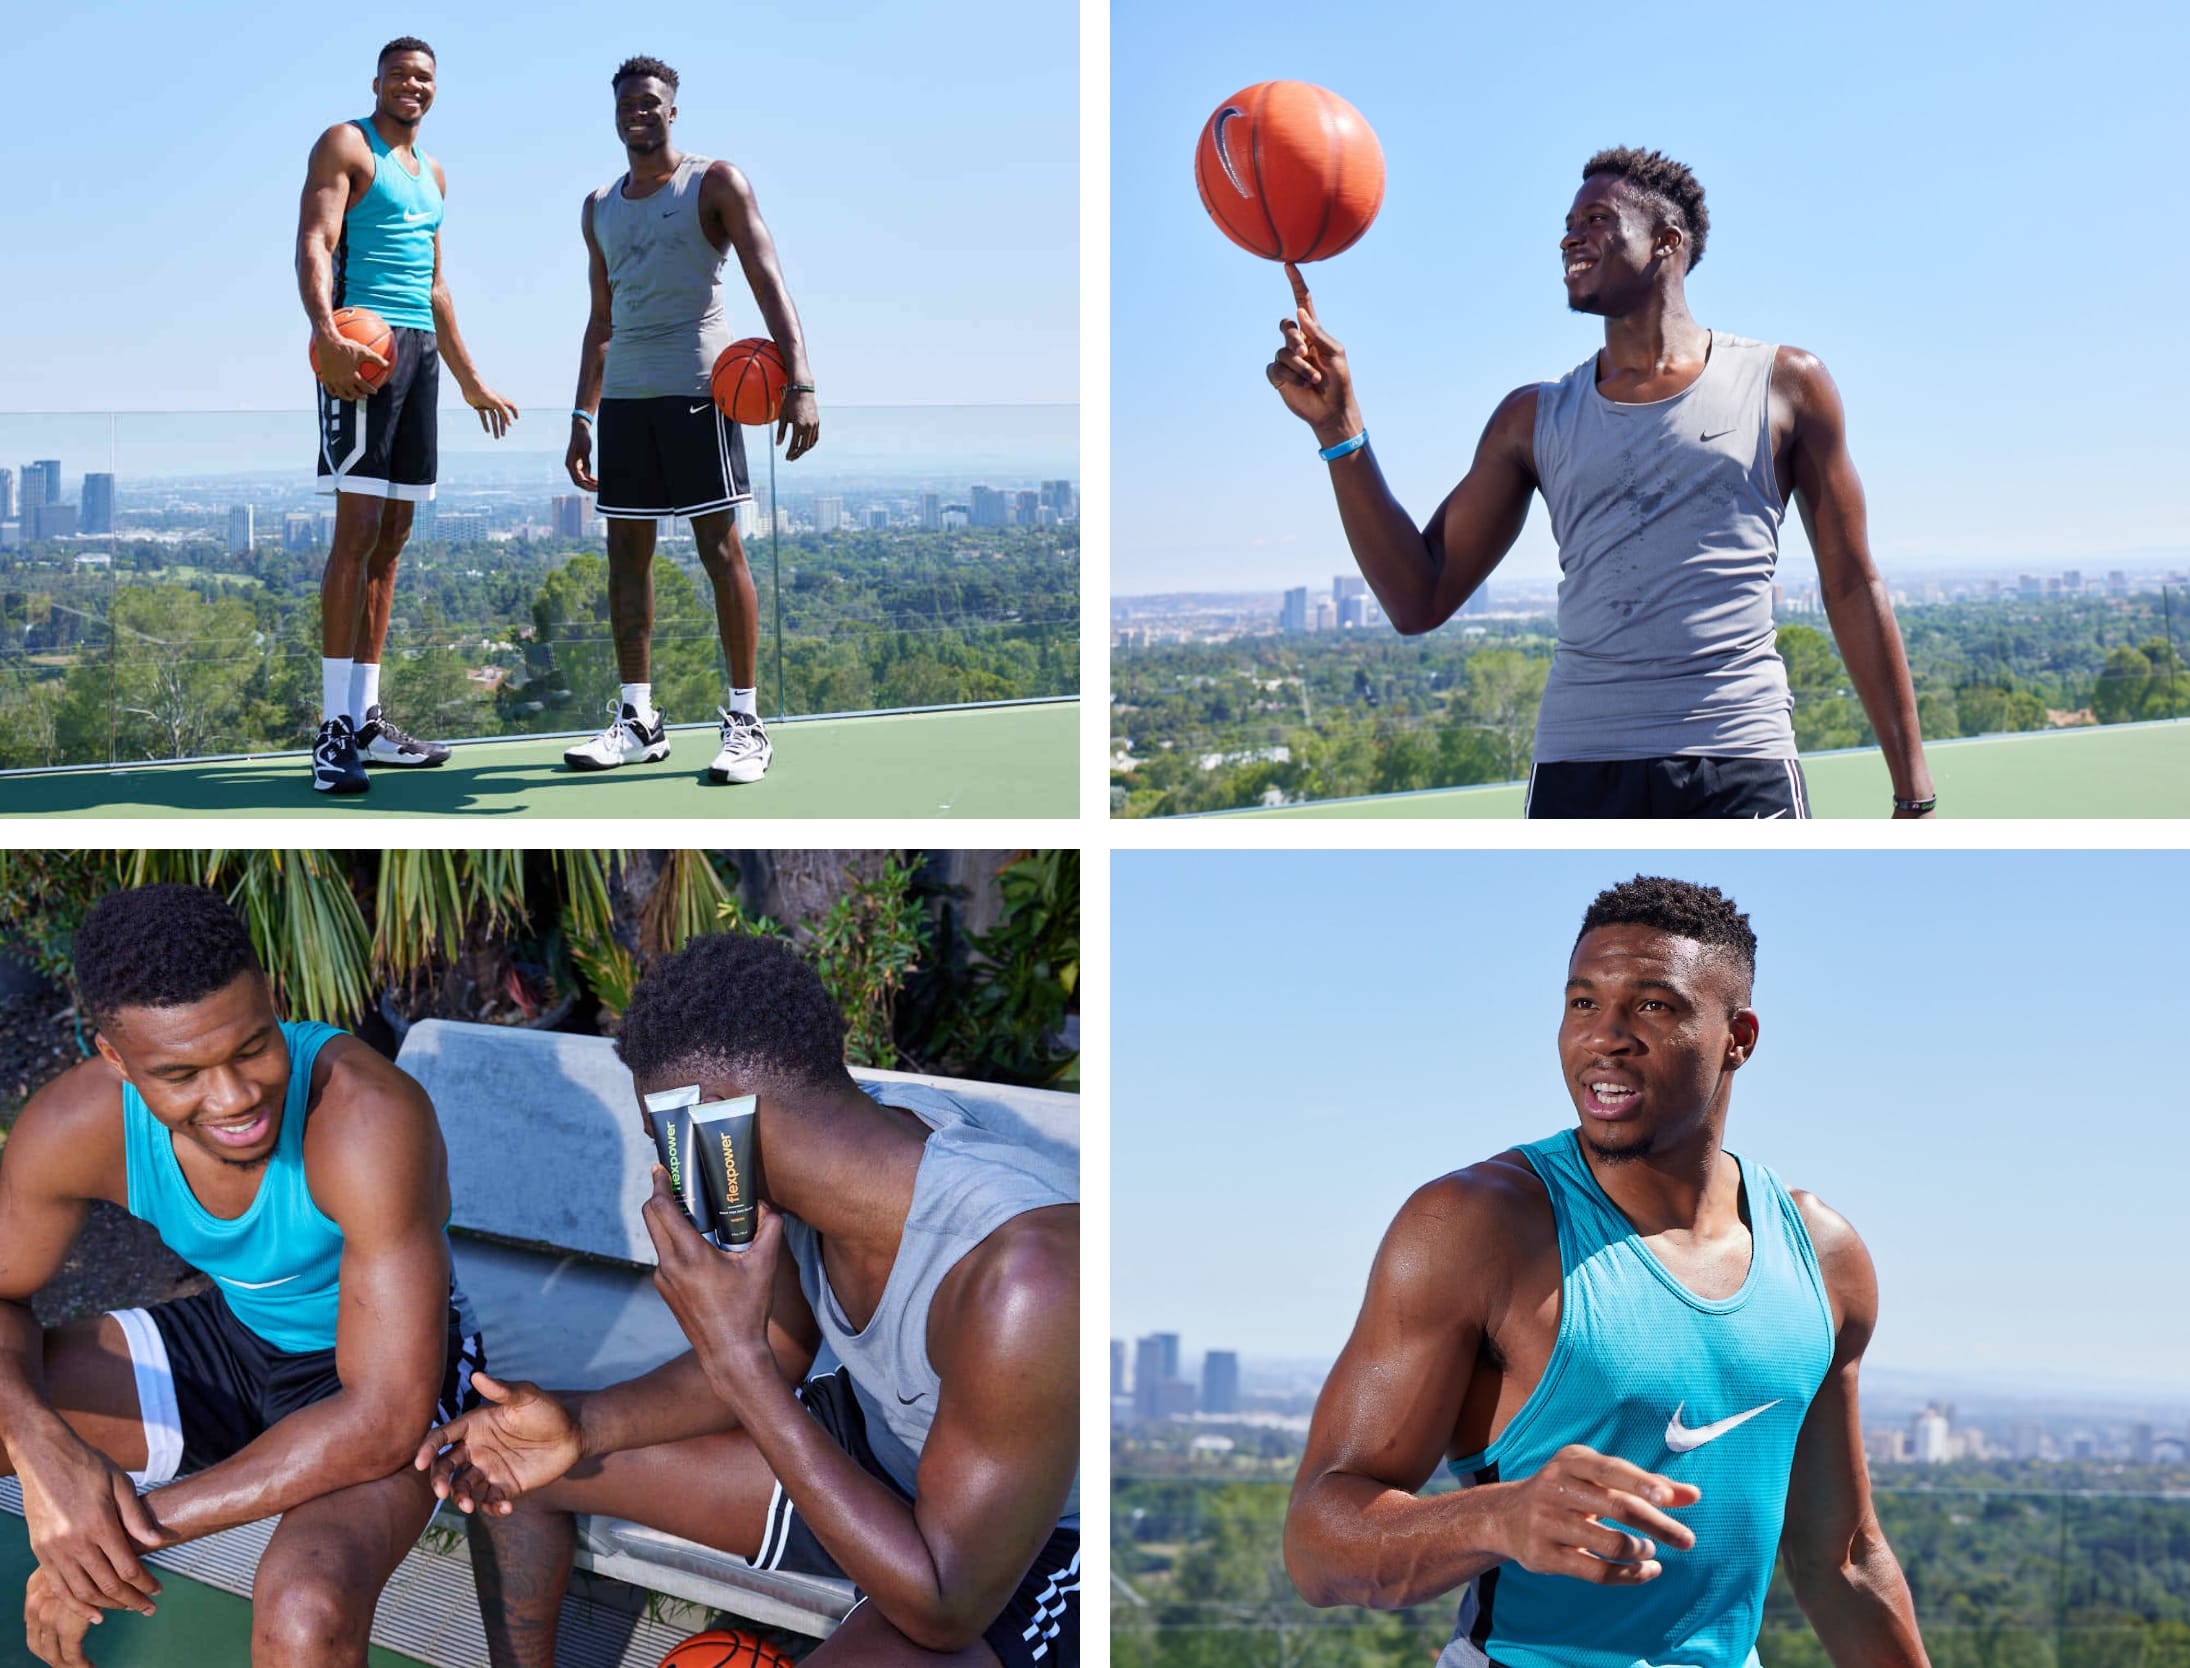 NBA Star Giannis Antetokounmpo invests in Flexpower for pain